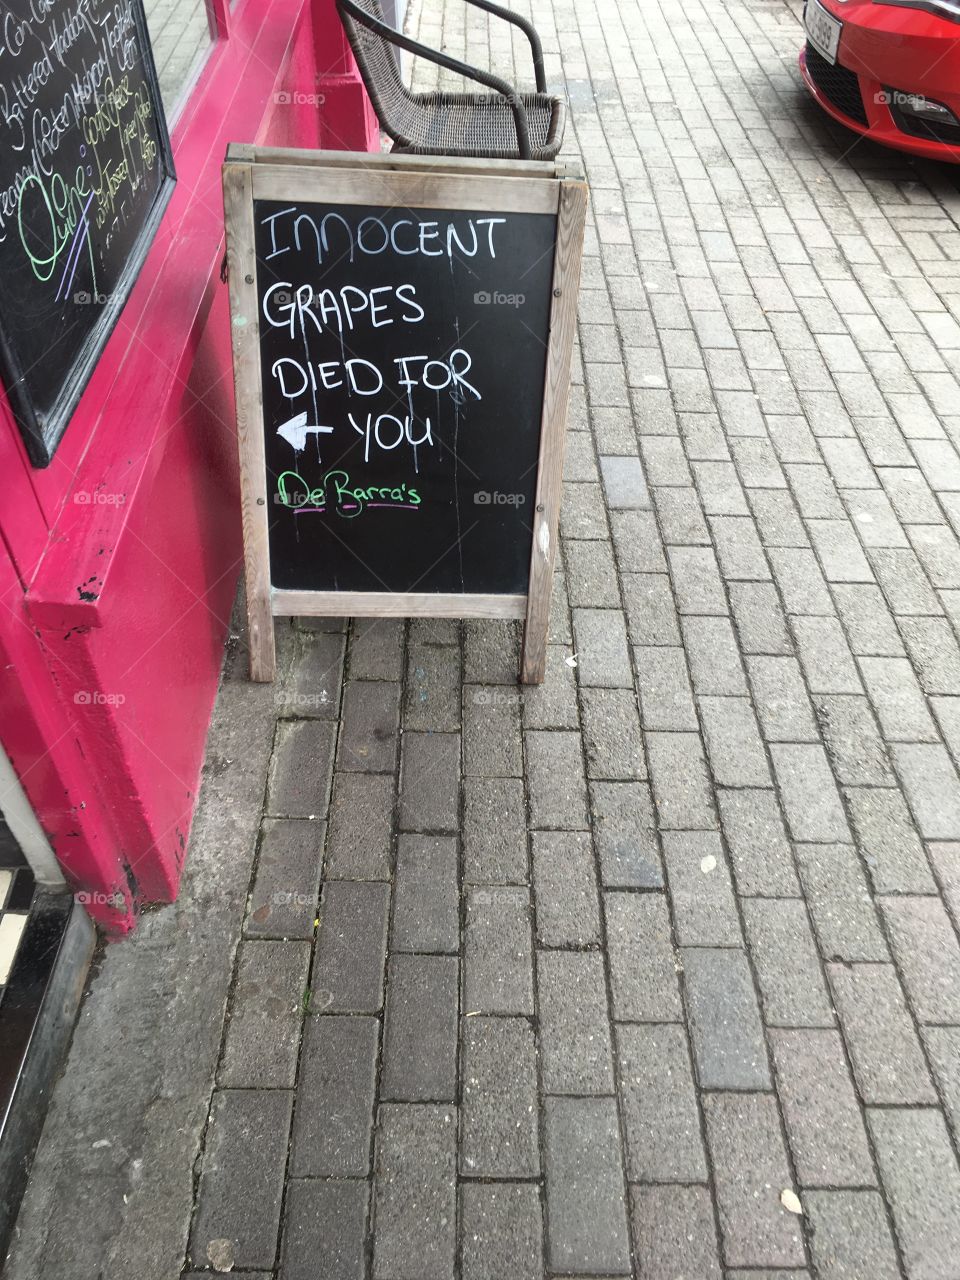 A funny sign about wine in Bantry county cork Ireland 